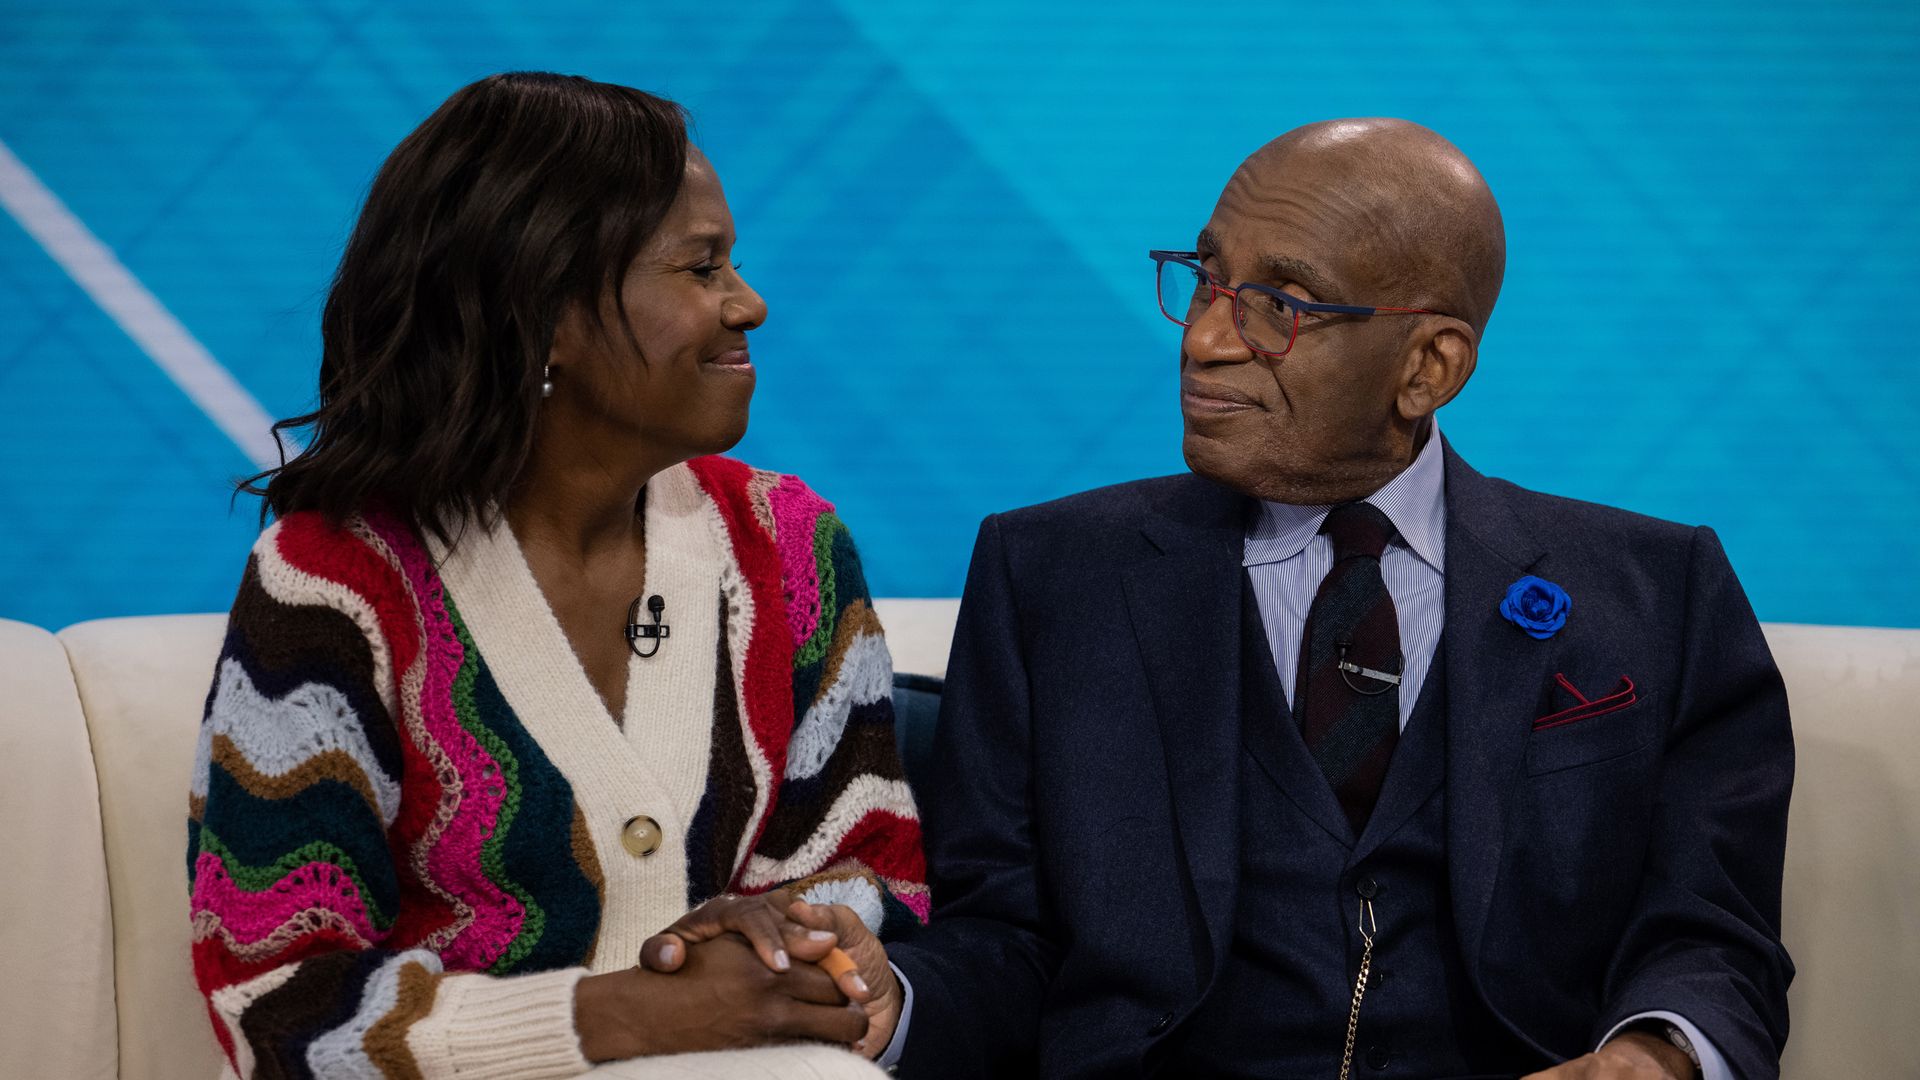 TODAY -- Pictured: Deborah Roberts and Al Roker on Friday, January 6, 2023